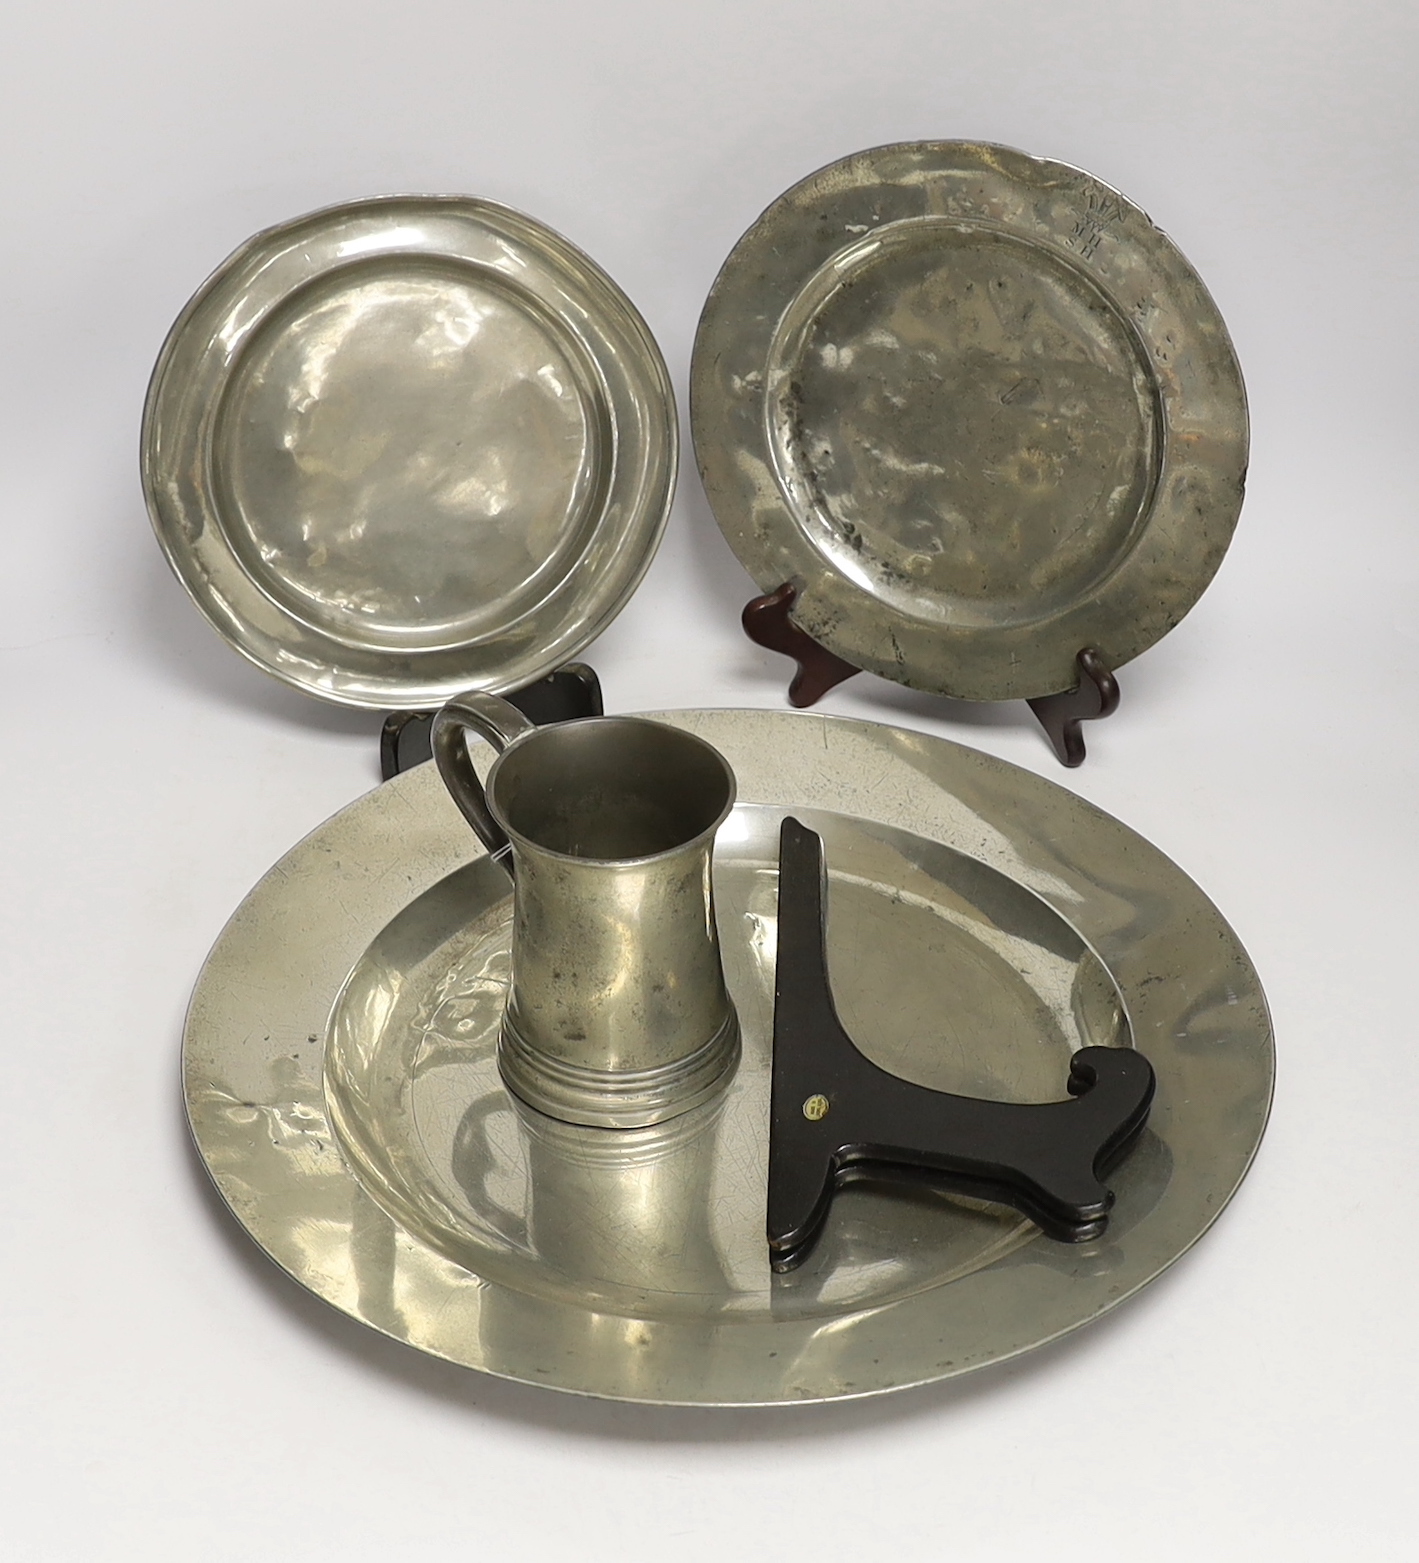 Four 18th century and later pewterware items including a charger, 41.5cm diameter, two plates, and a